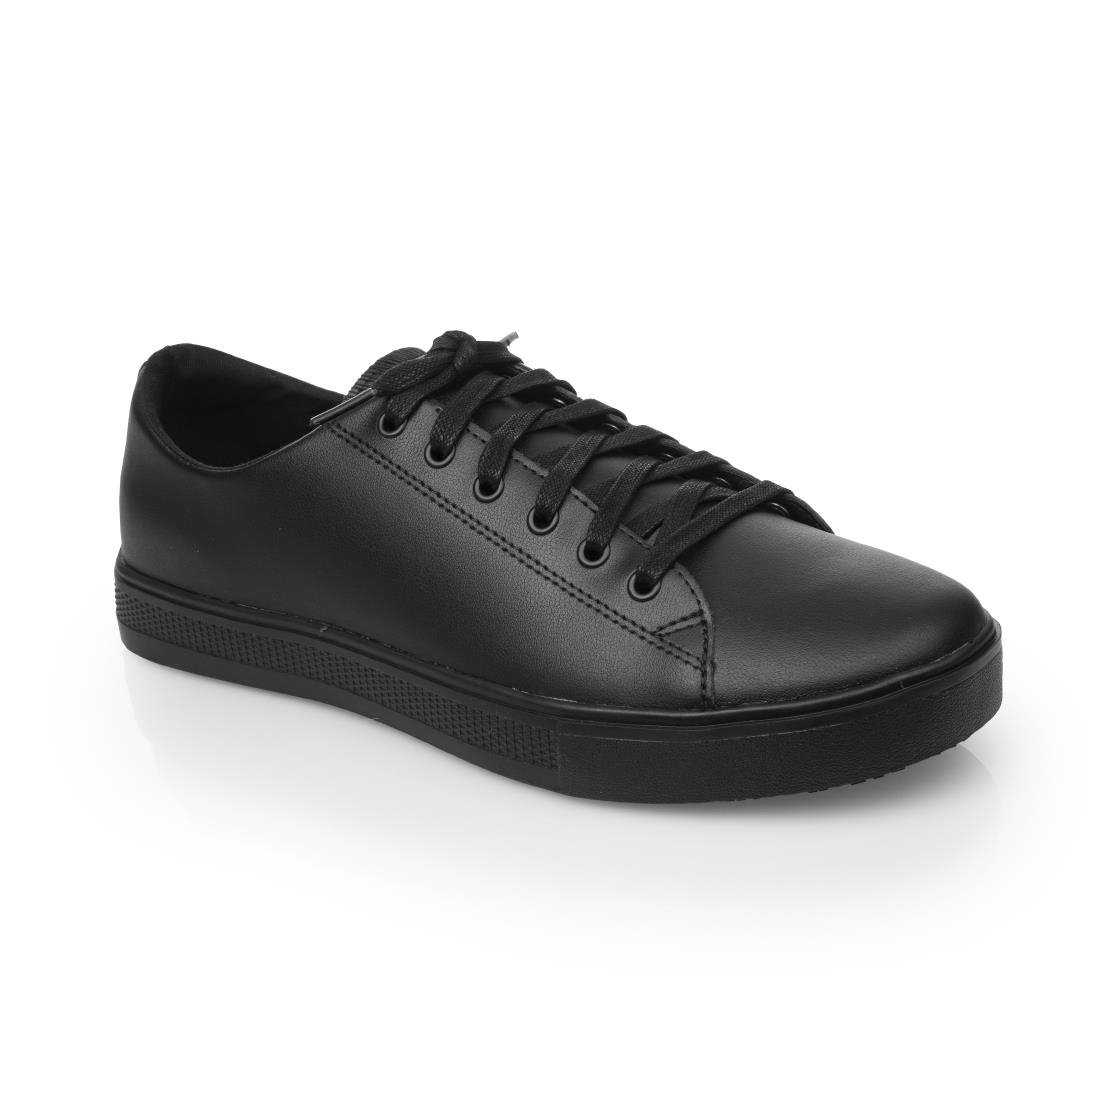 BB161-46 Shoes for Crews Old School Trainers Black 46